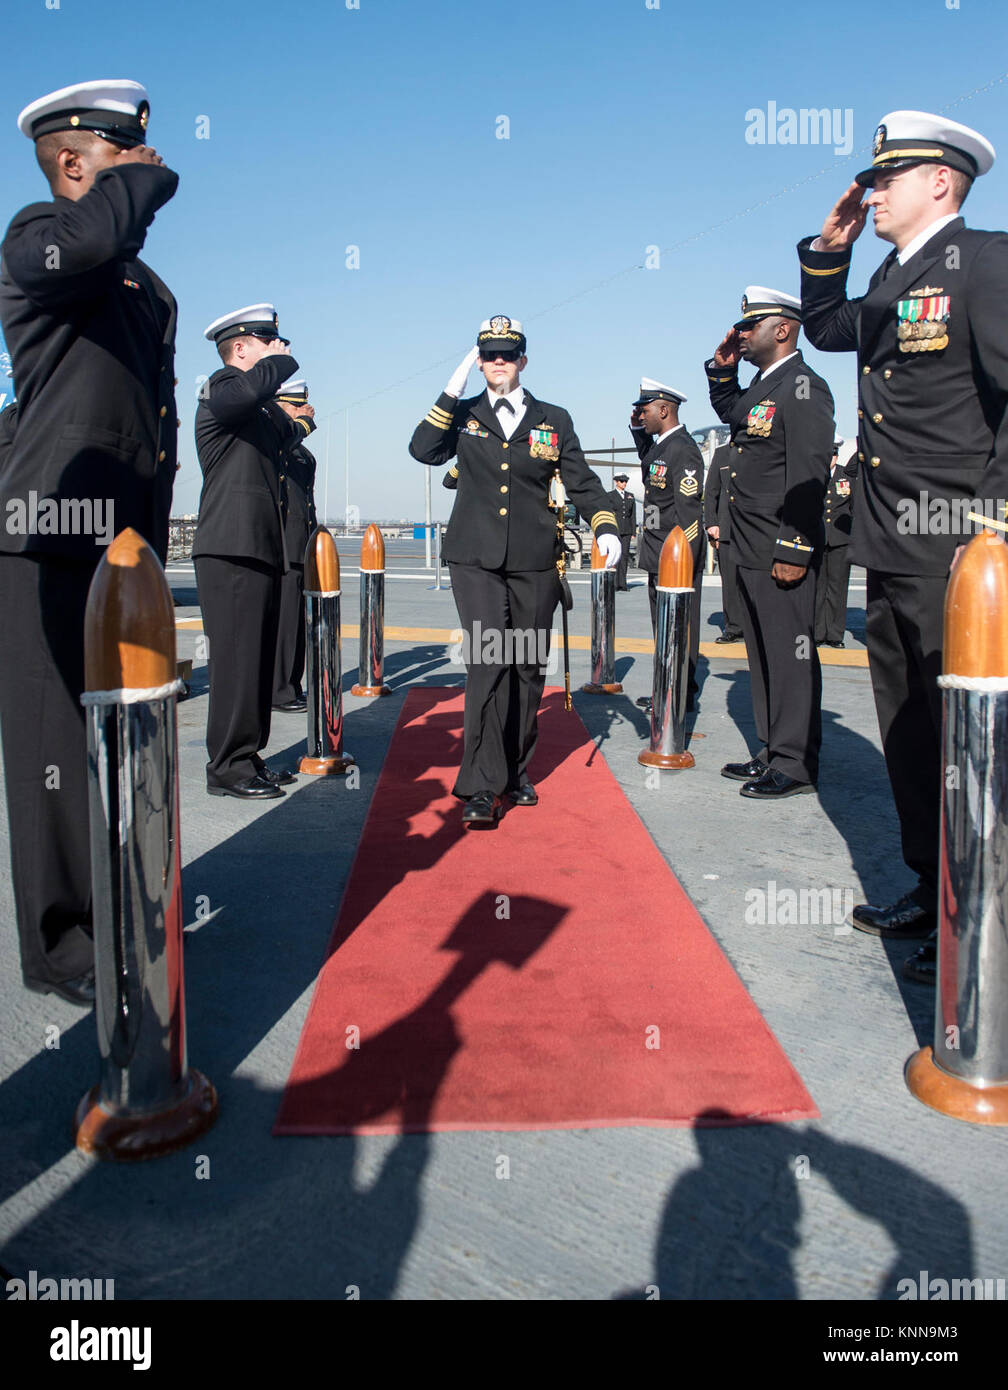 MIDWAY MUSEUM, Calif. (Dec. 01, 2017) CDR Danielle Defant salutes the sideboys as she enters USS Paul Hamilton change of command ceremony. During the ceremony CDR Edward Bertucci relieved CDR Danielle Defant as commanding officer of USS Paul Hamilton. (U.S. Navy Stock Photo